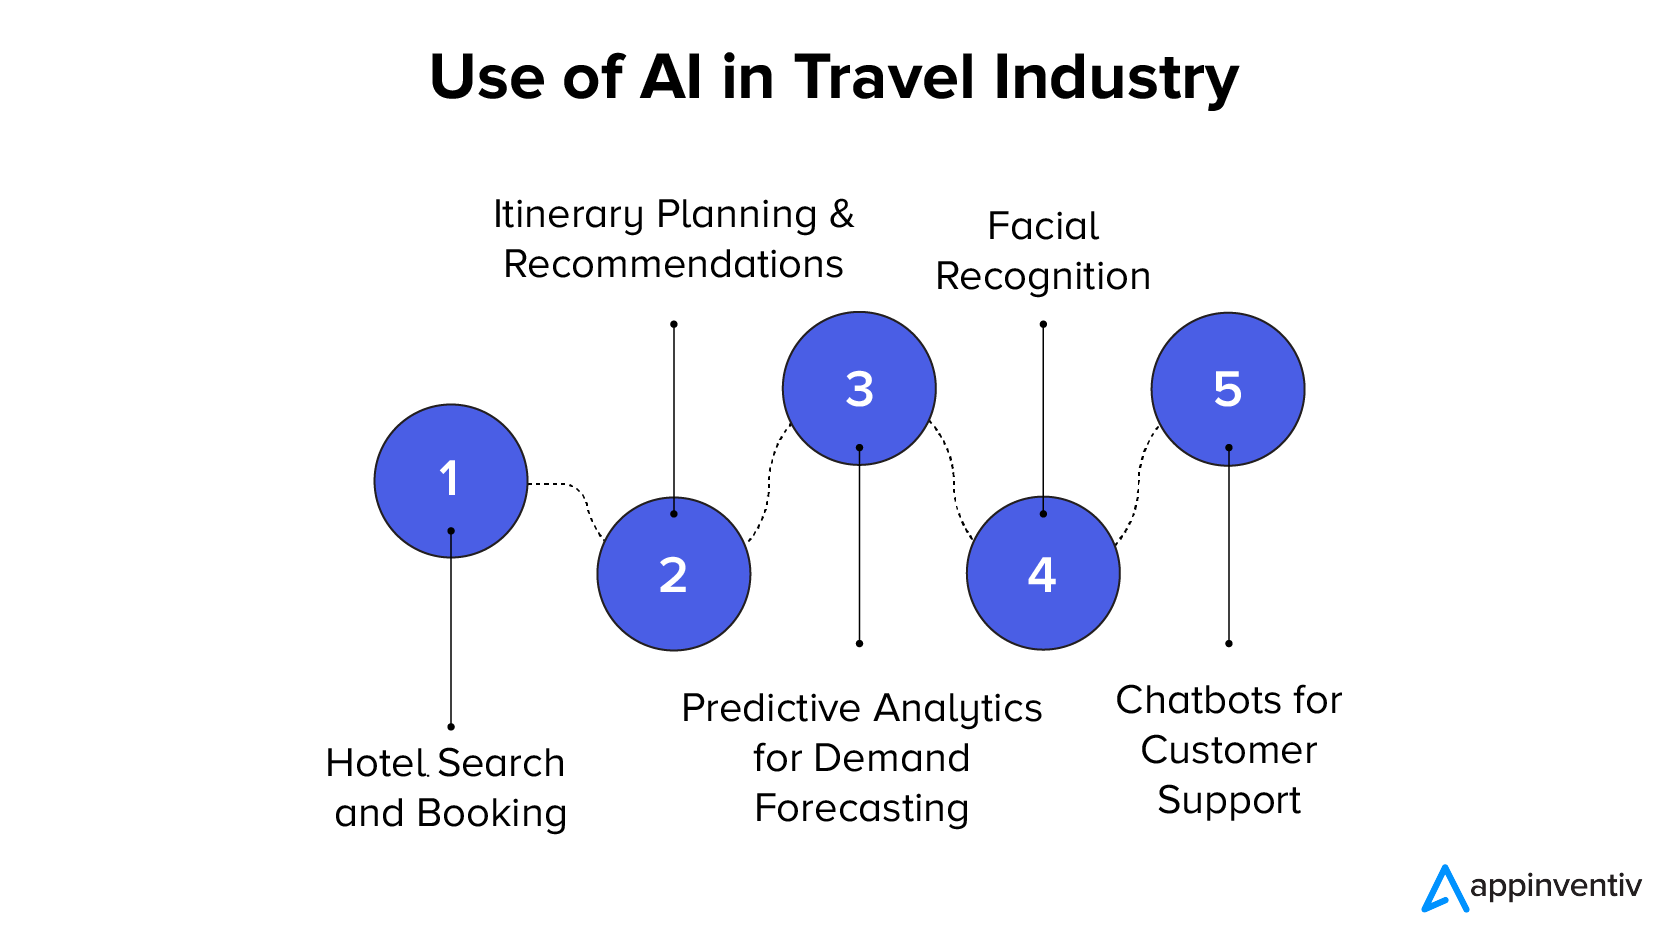 Use of AI in Travel Industry